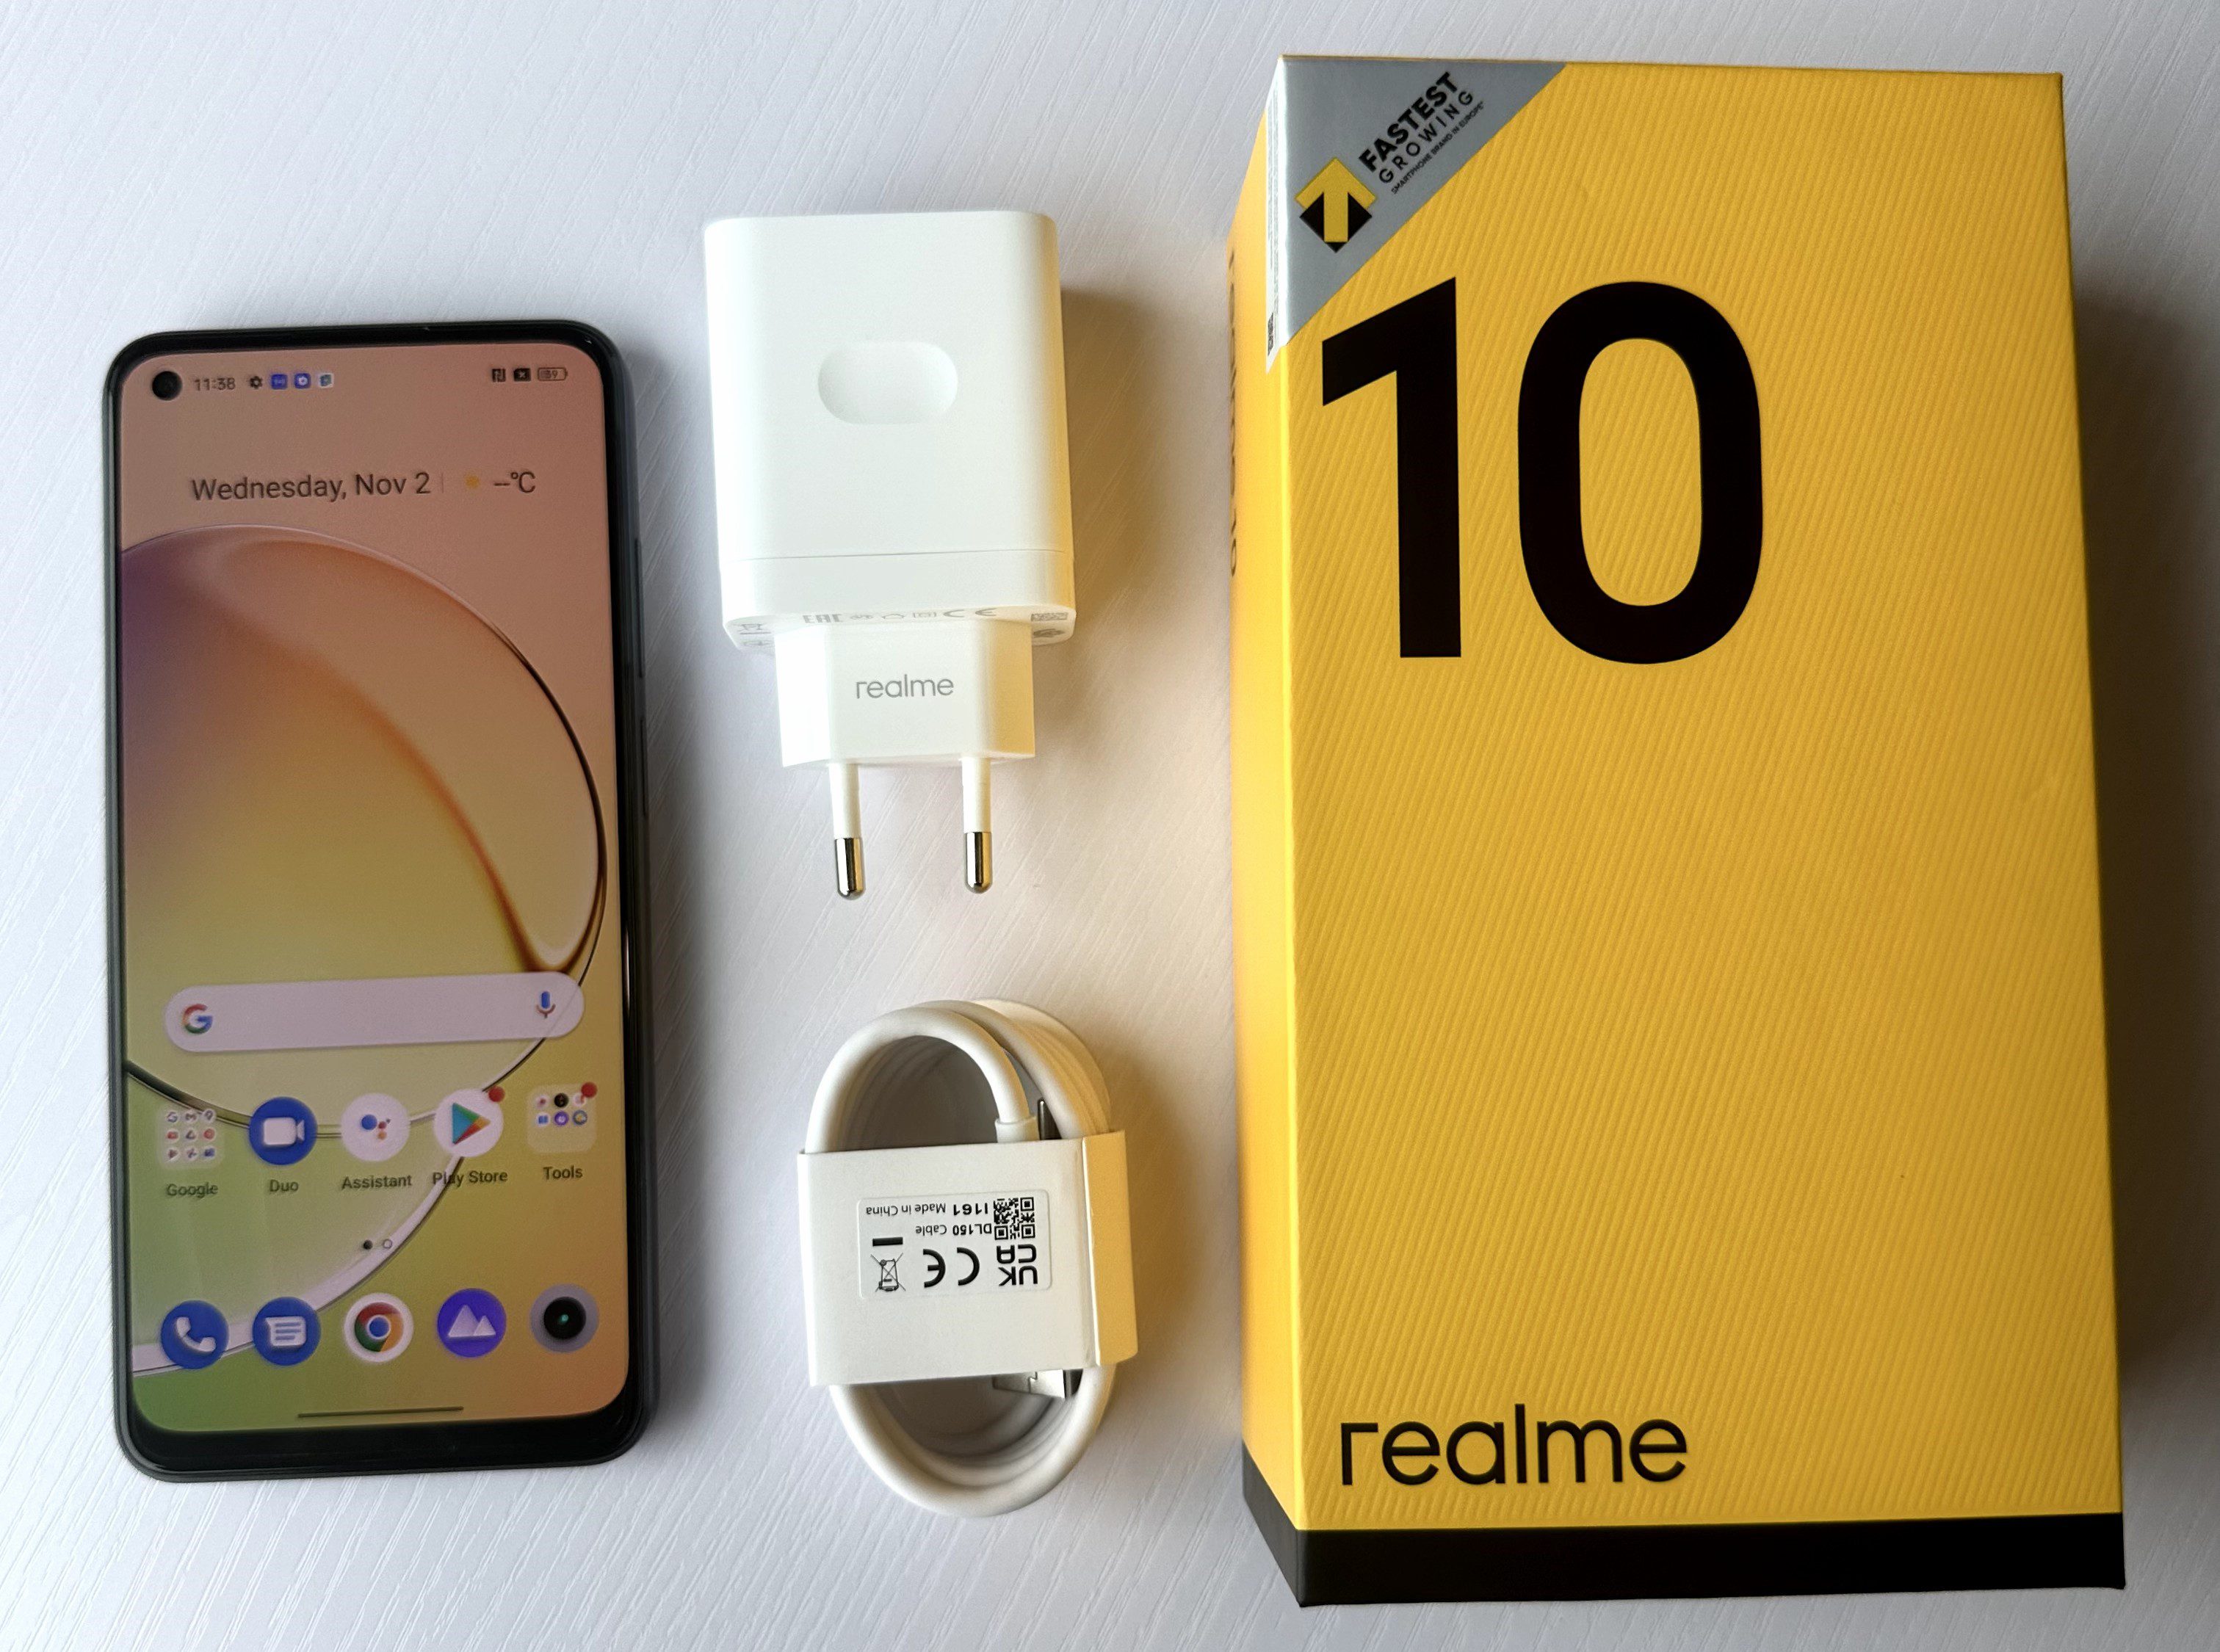 Realme 10 Smartphone - The best phone about $200 for social media lovers